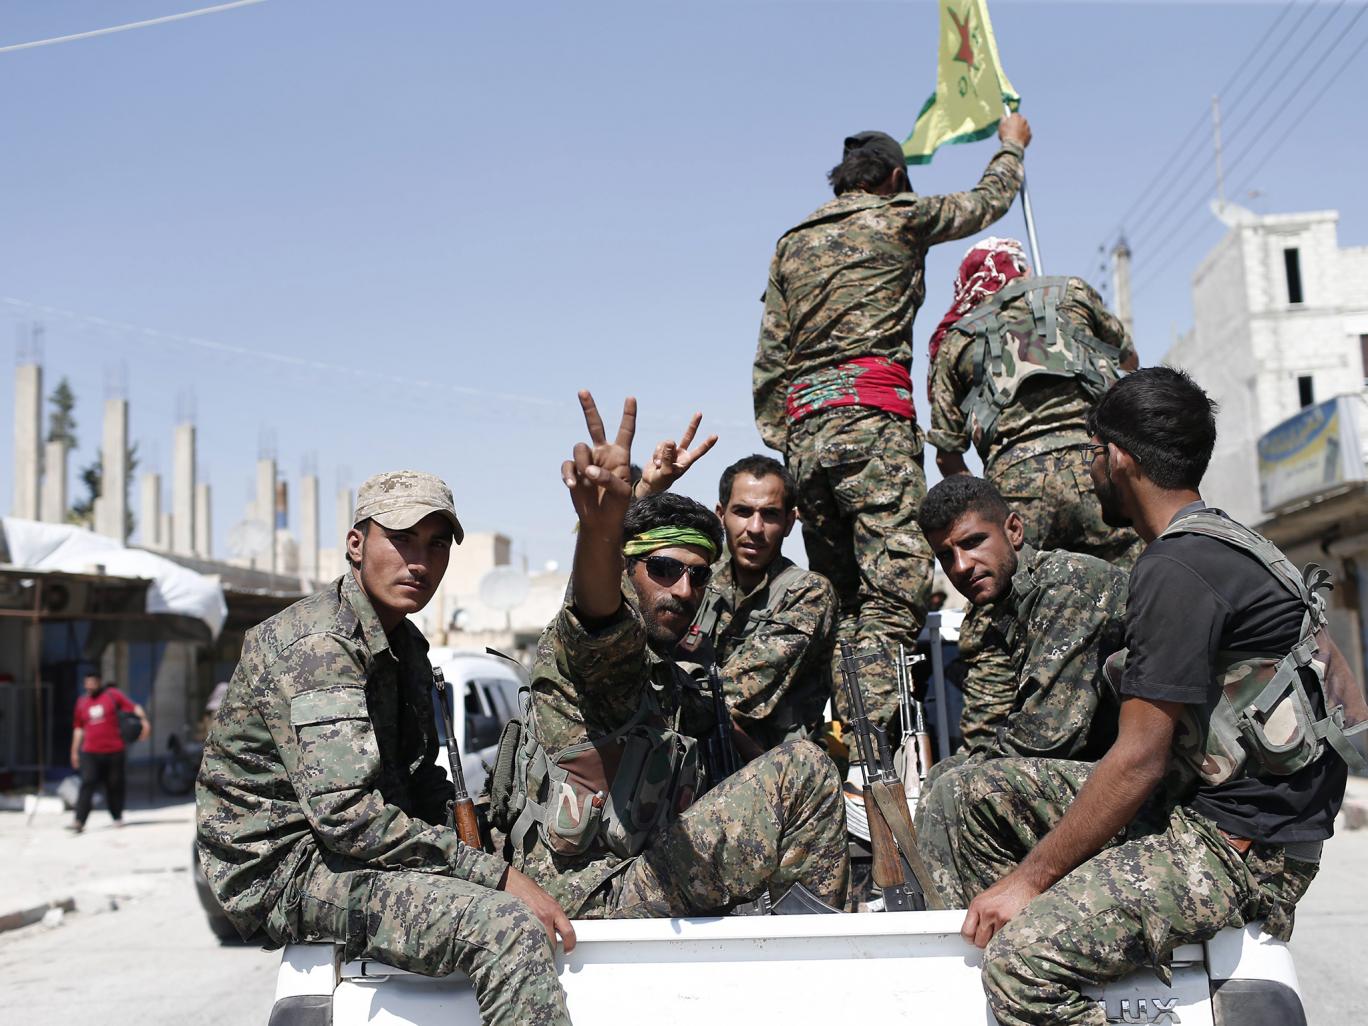 Clashes between Kurdish and Turkish forces in Syria threaten to derail fight against Isis